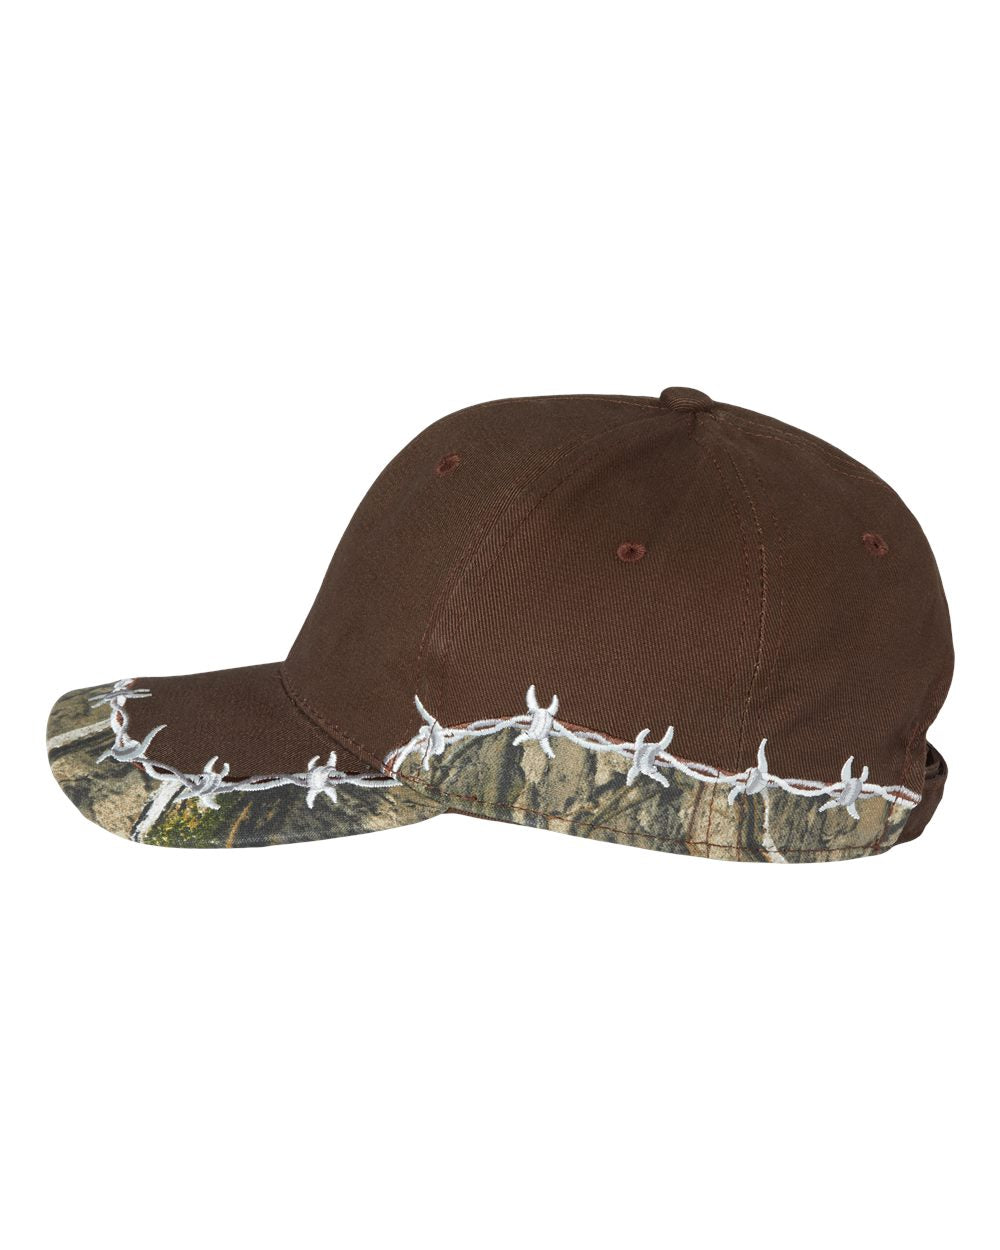  Image of the Barbed Wire Camo Cap, featuring a camouflage design with subtle barbed wire accents, ideal for outdoor activities and blending into natural environments.